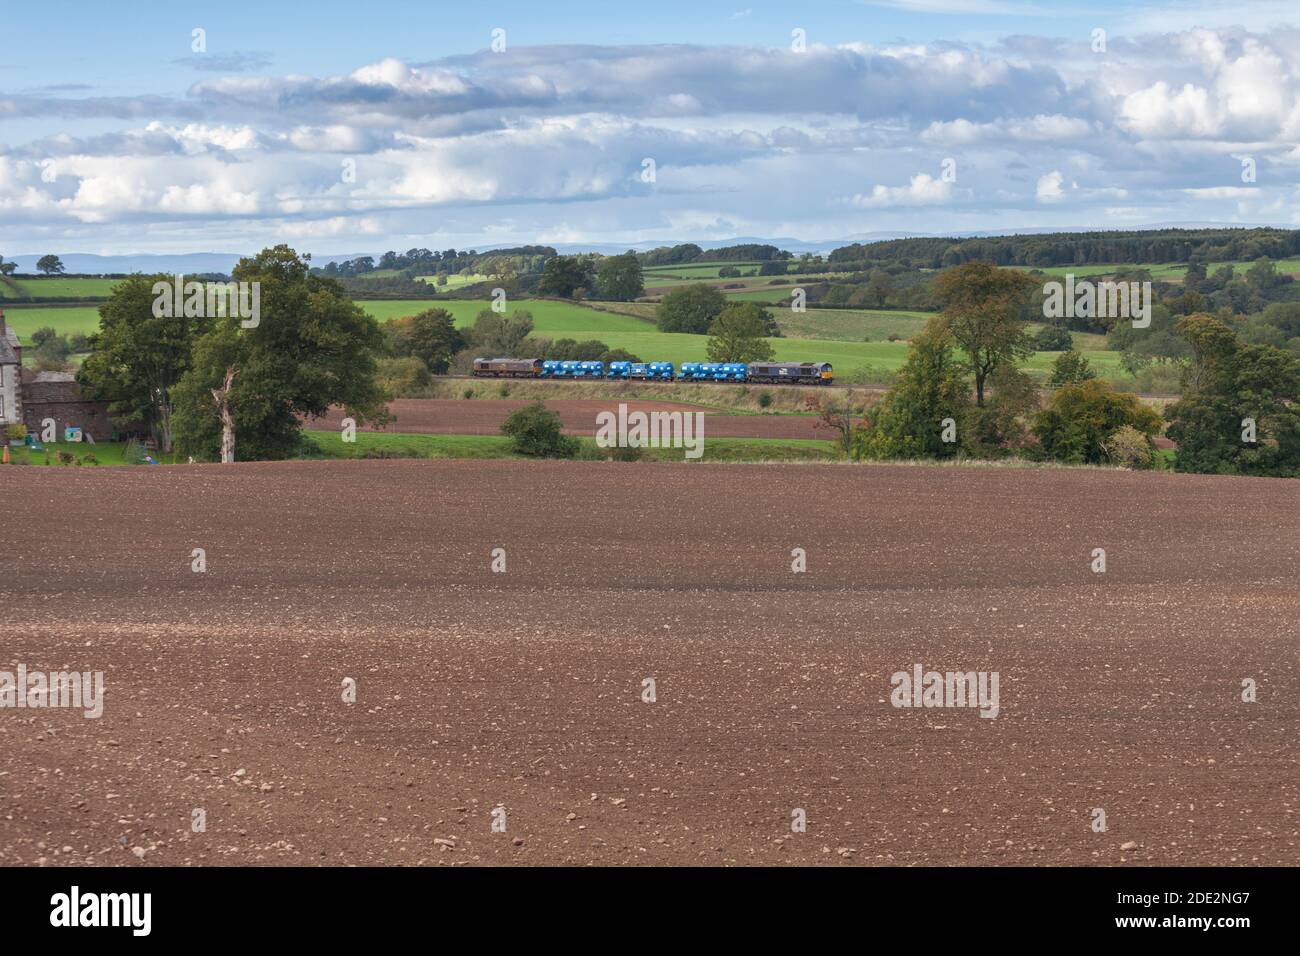 Direct Rail Services class 66 locomotives in the countryside with a Network Rail Railhead treatment train ( RHTT ) dealing with autumn leaves Stock Photo